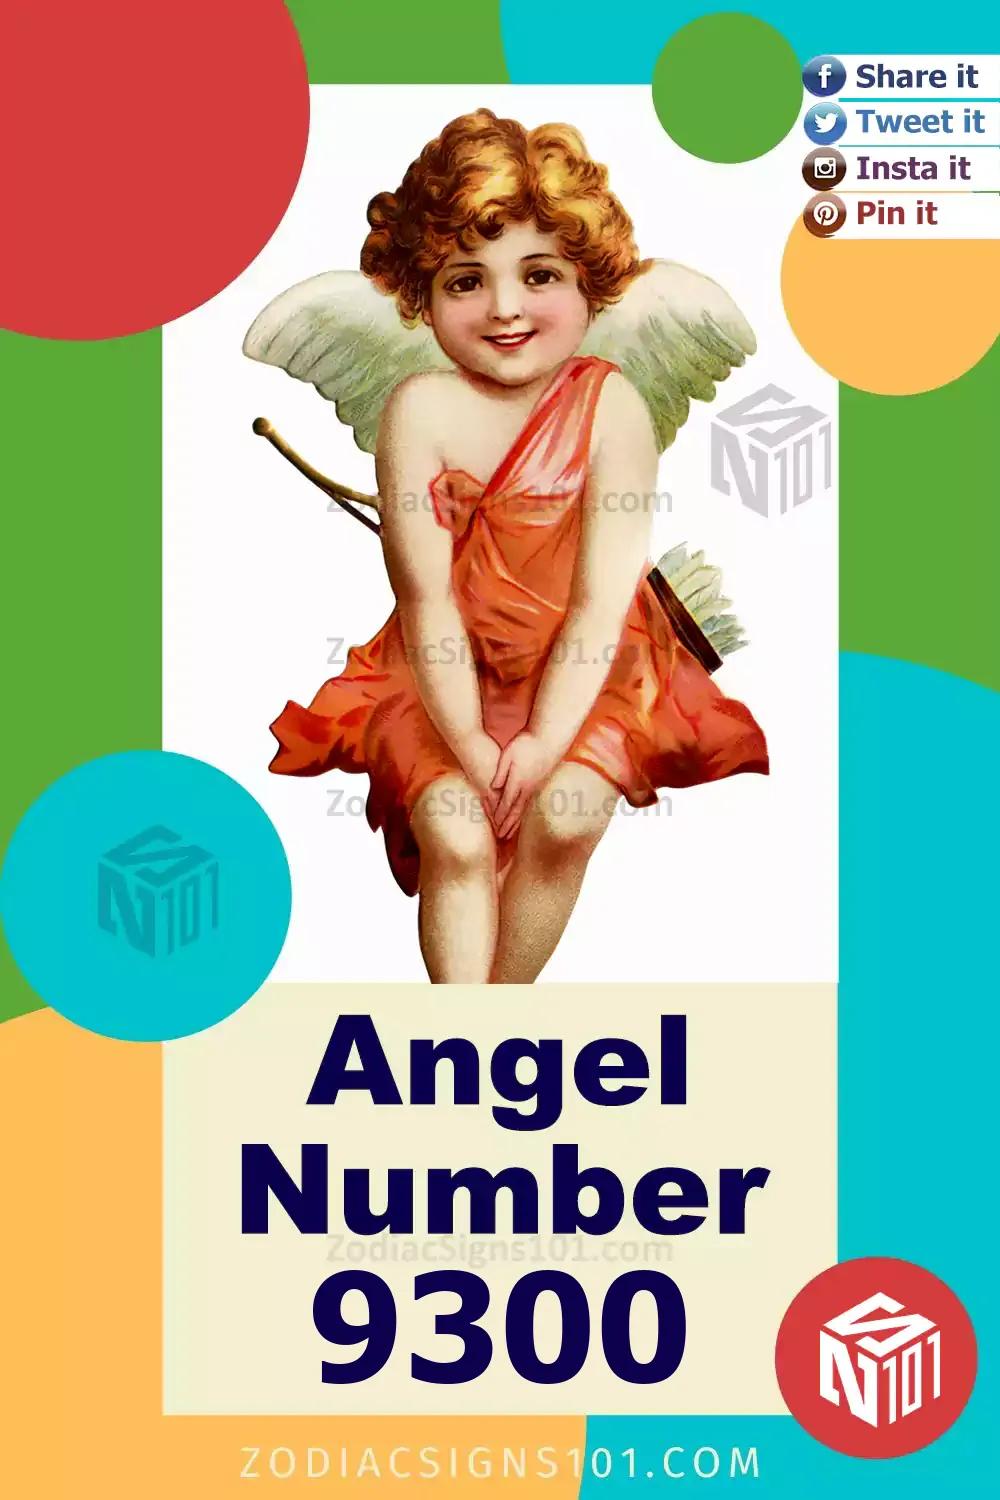 9300 Angel Number Meaning